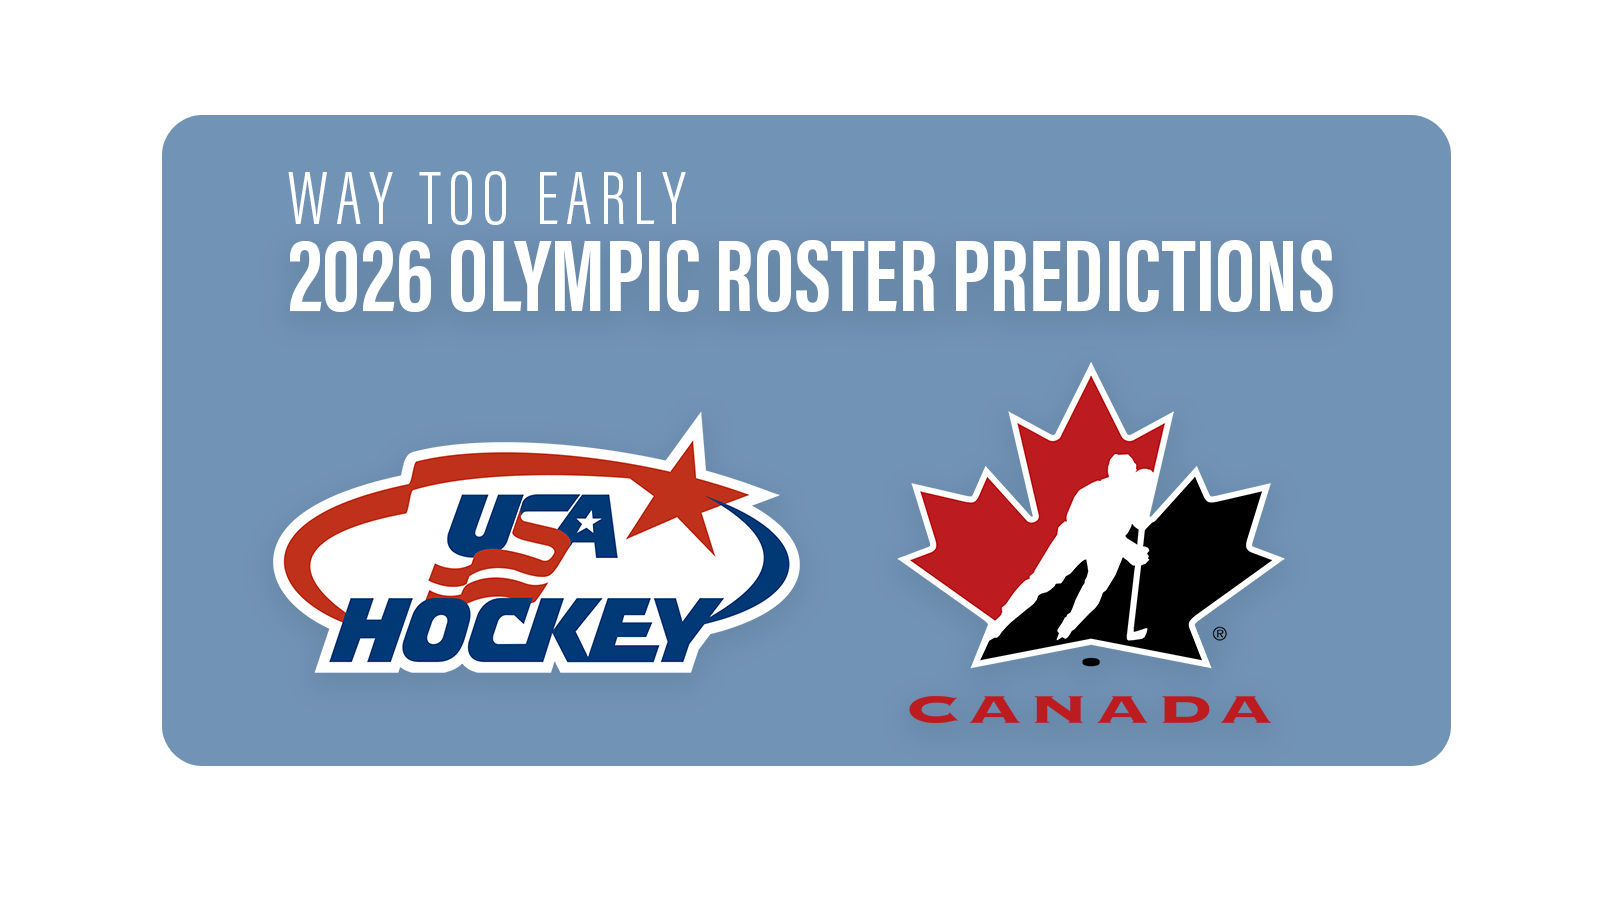 Way Too Early 2026 Olympic Roster Predictions – Team Canada & Team USA